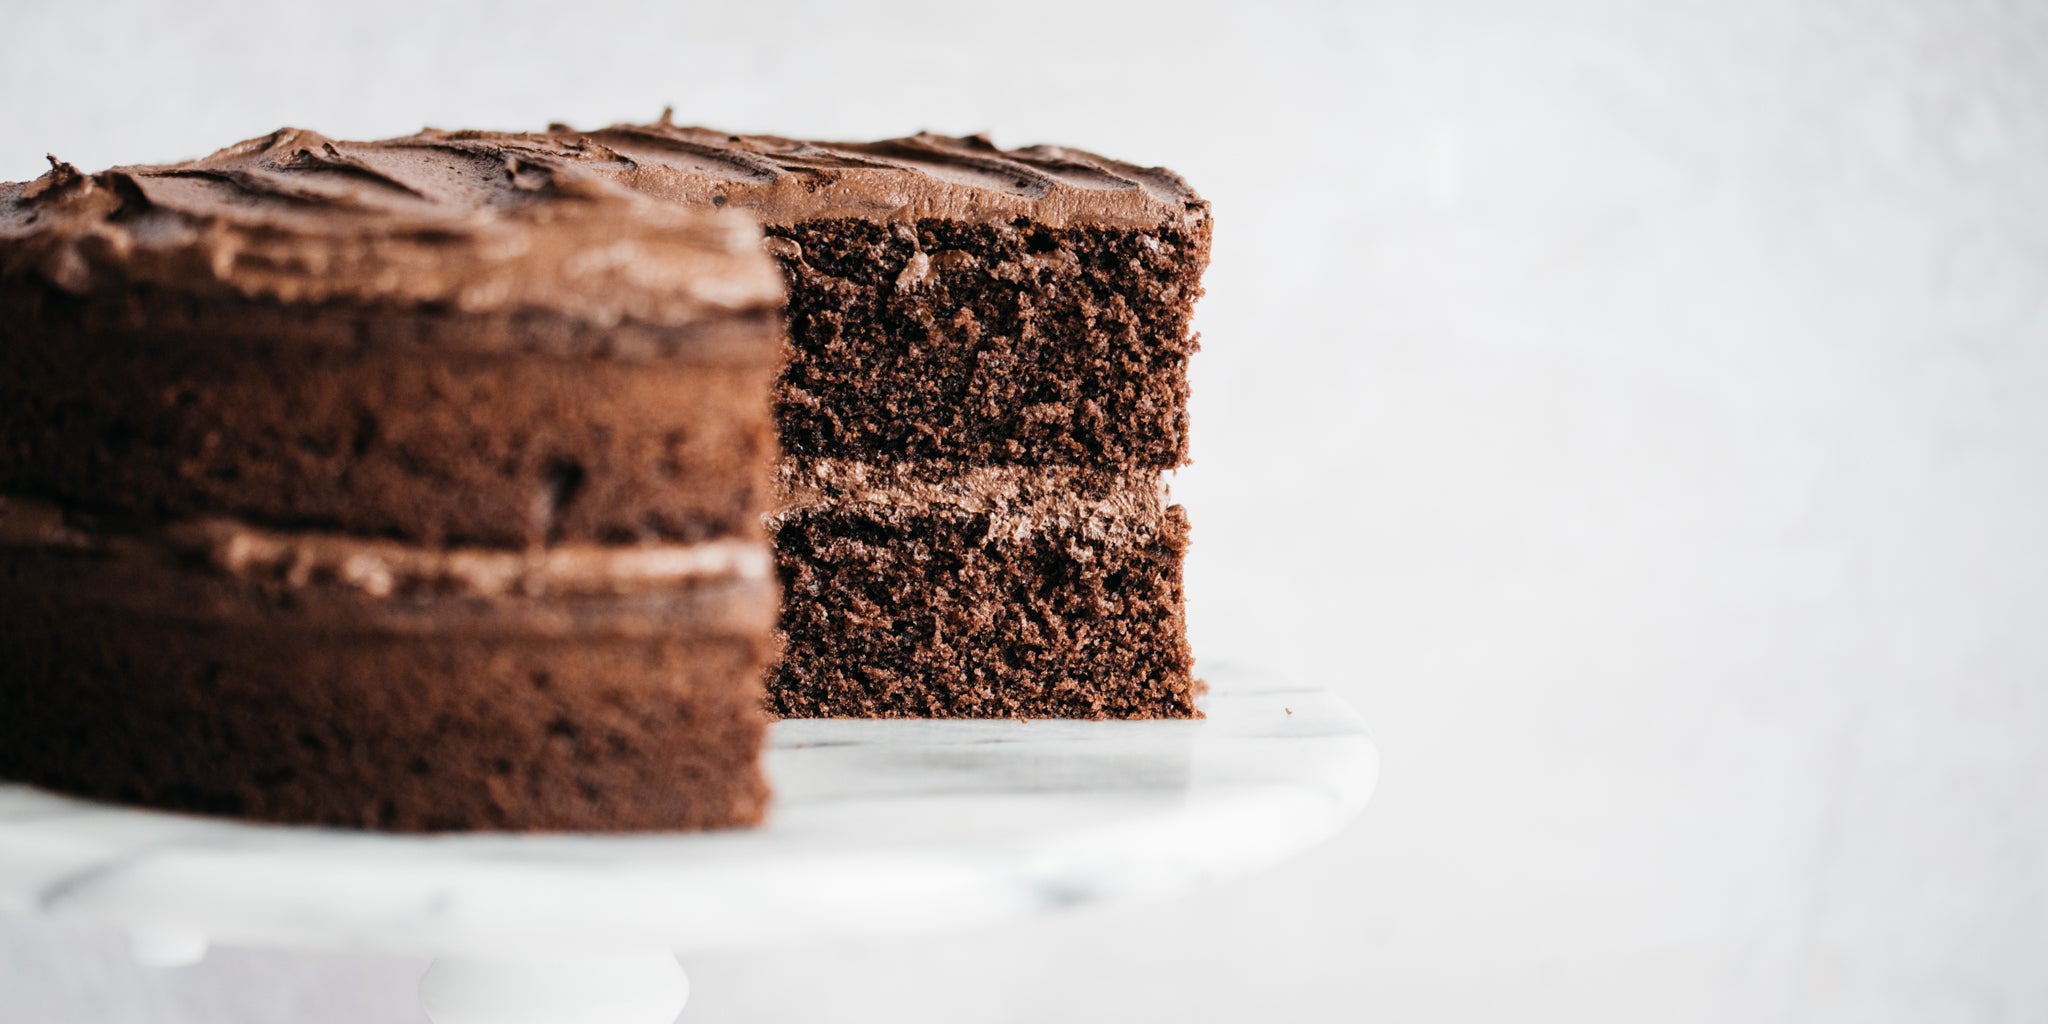 Close up of chocolate cake with a slice removed from it